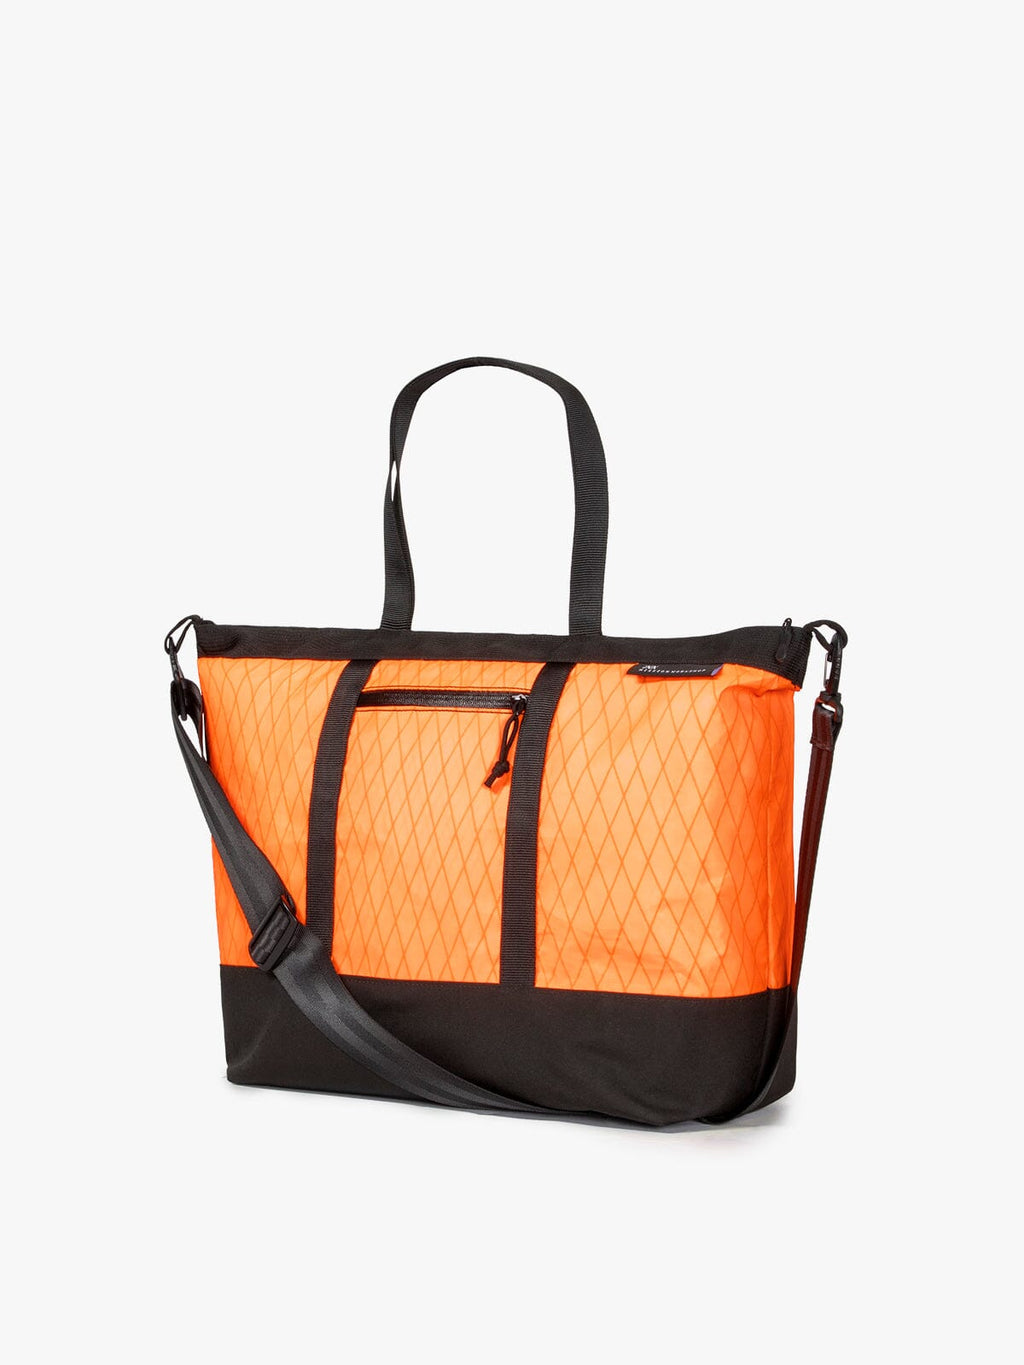 Patch Bag 1 Tote Bag by Coyote Eason